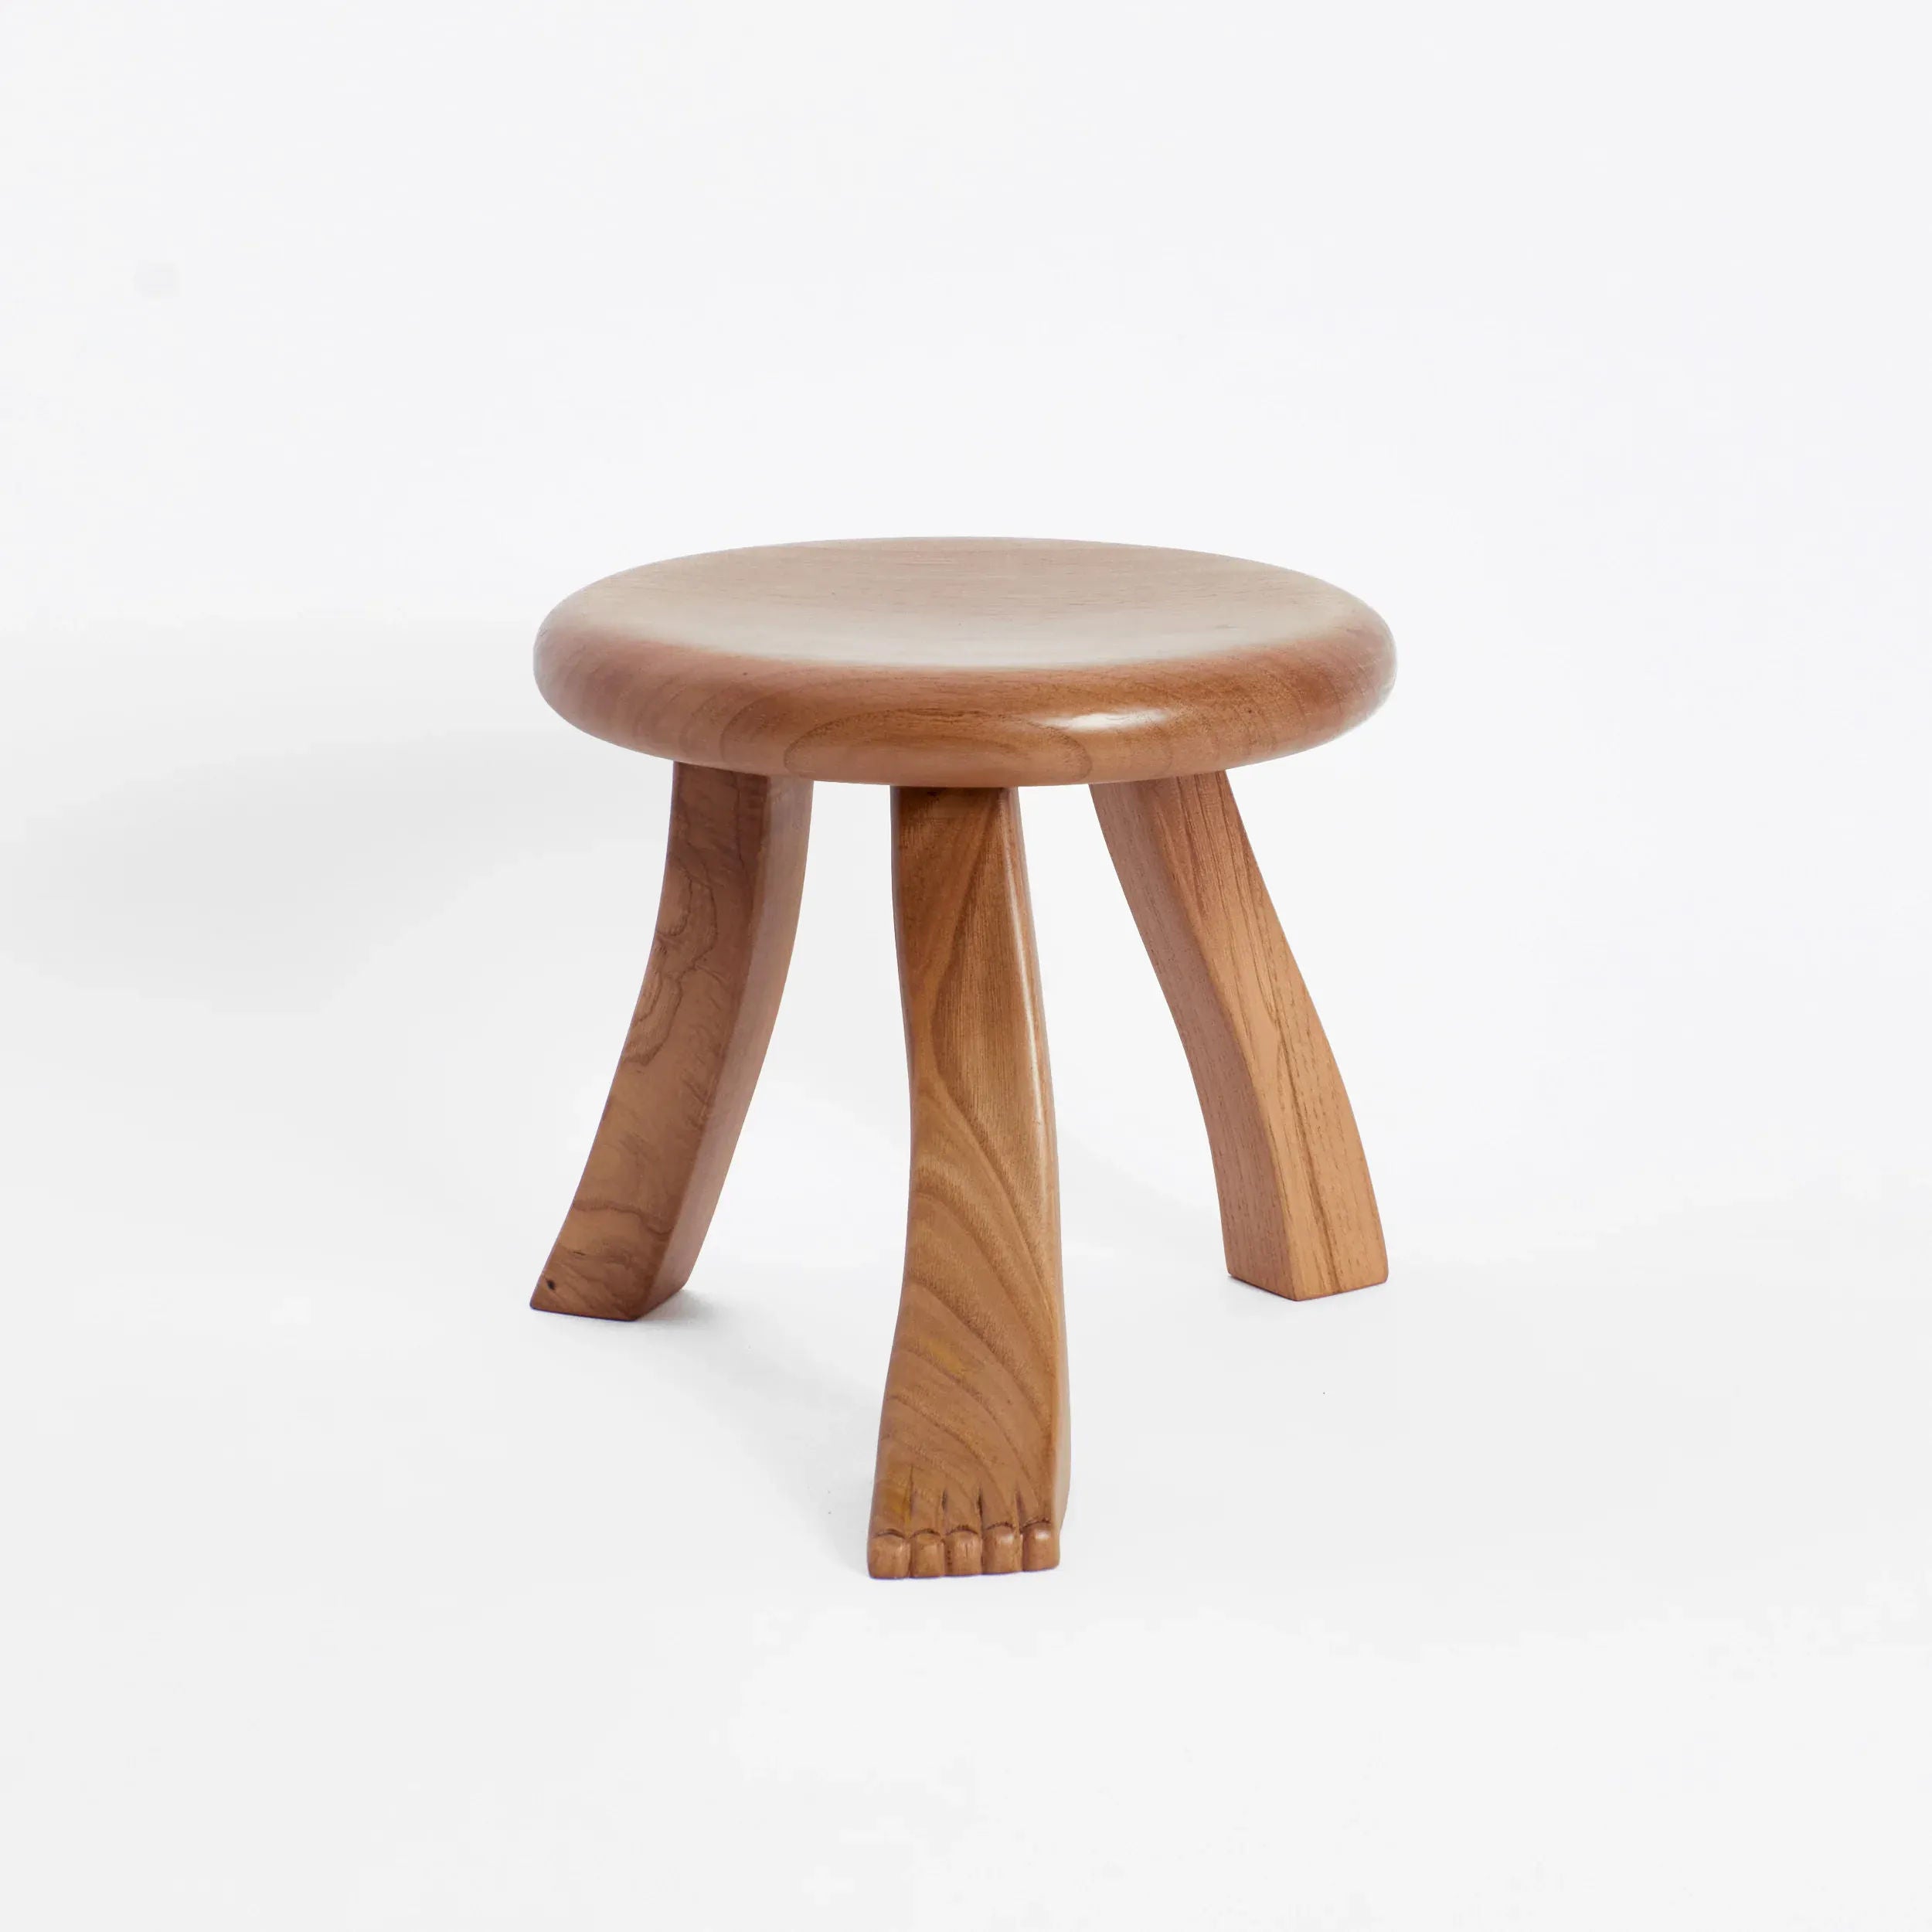 End Tables Foot Stool in Oak Project 213A